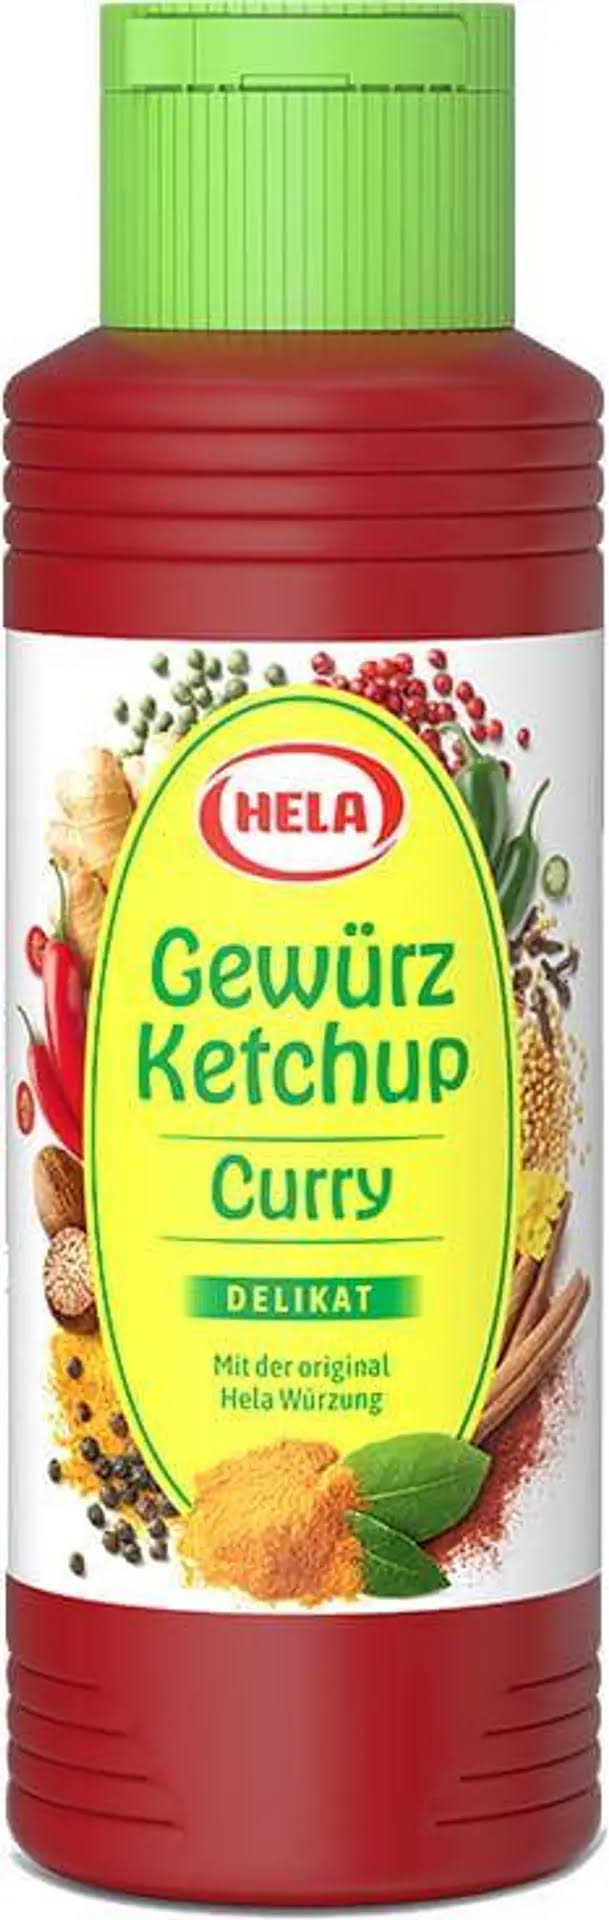 Hela Curry Spice Ketchup - Delicate, 300ml